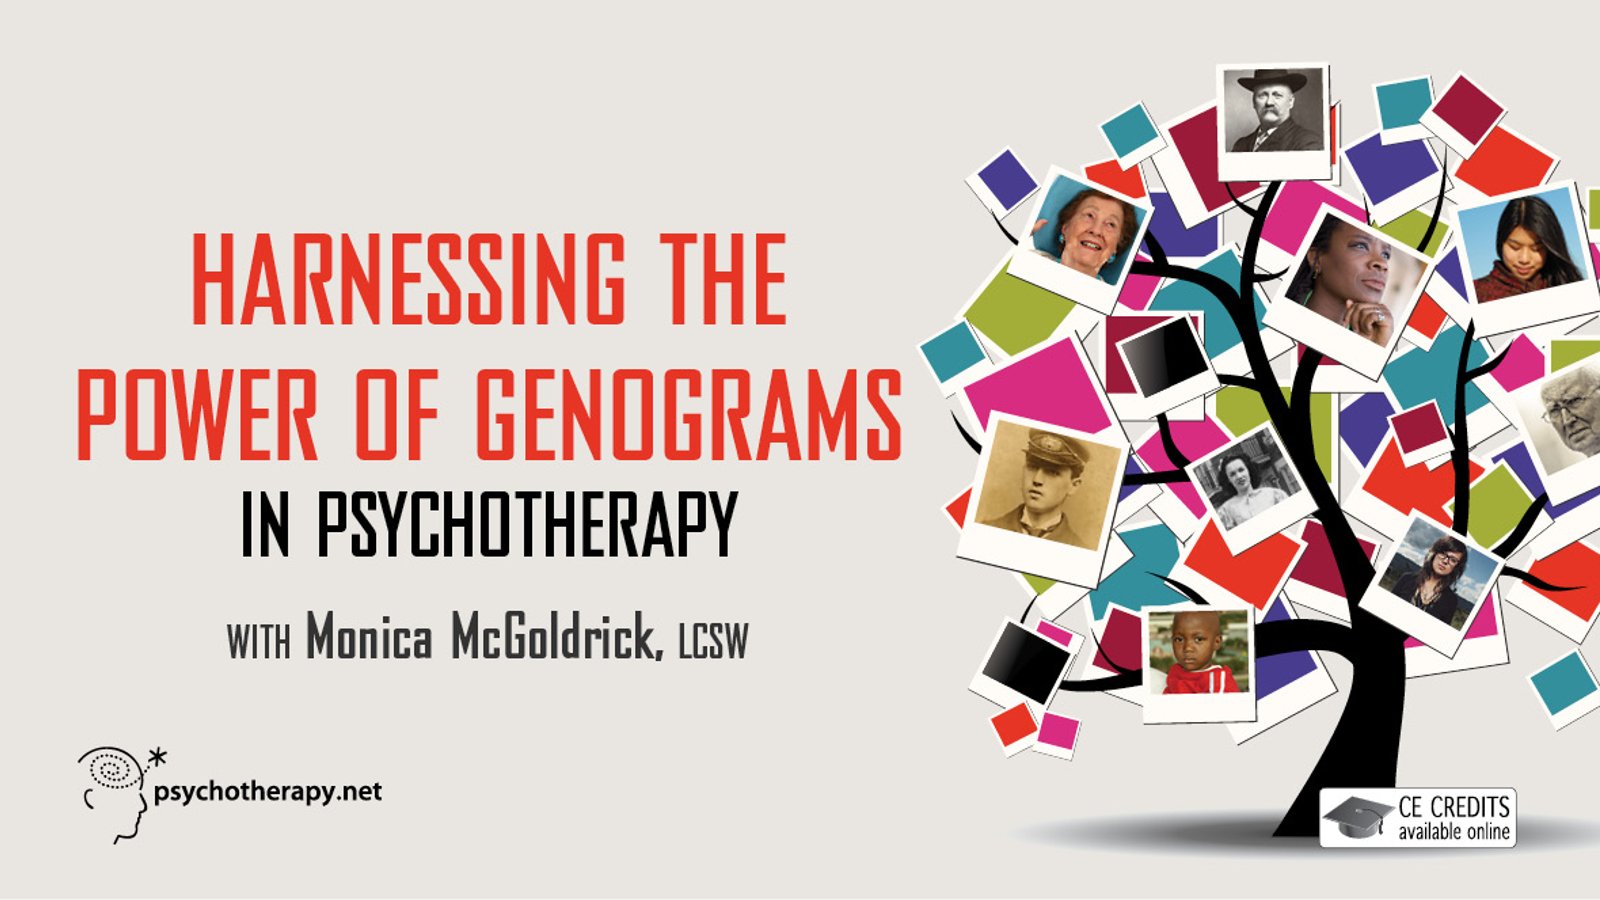 Harnessing the Power of Genograms in Psychotherapy - With Monica McGoldrick